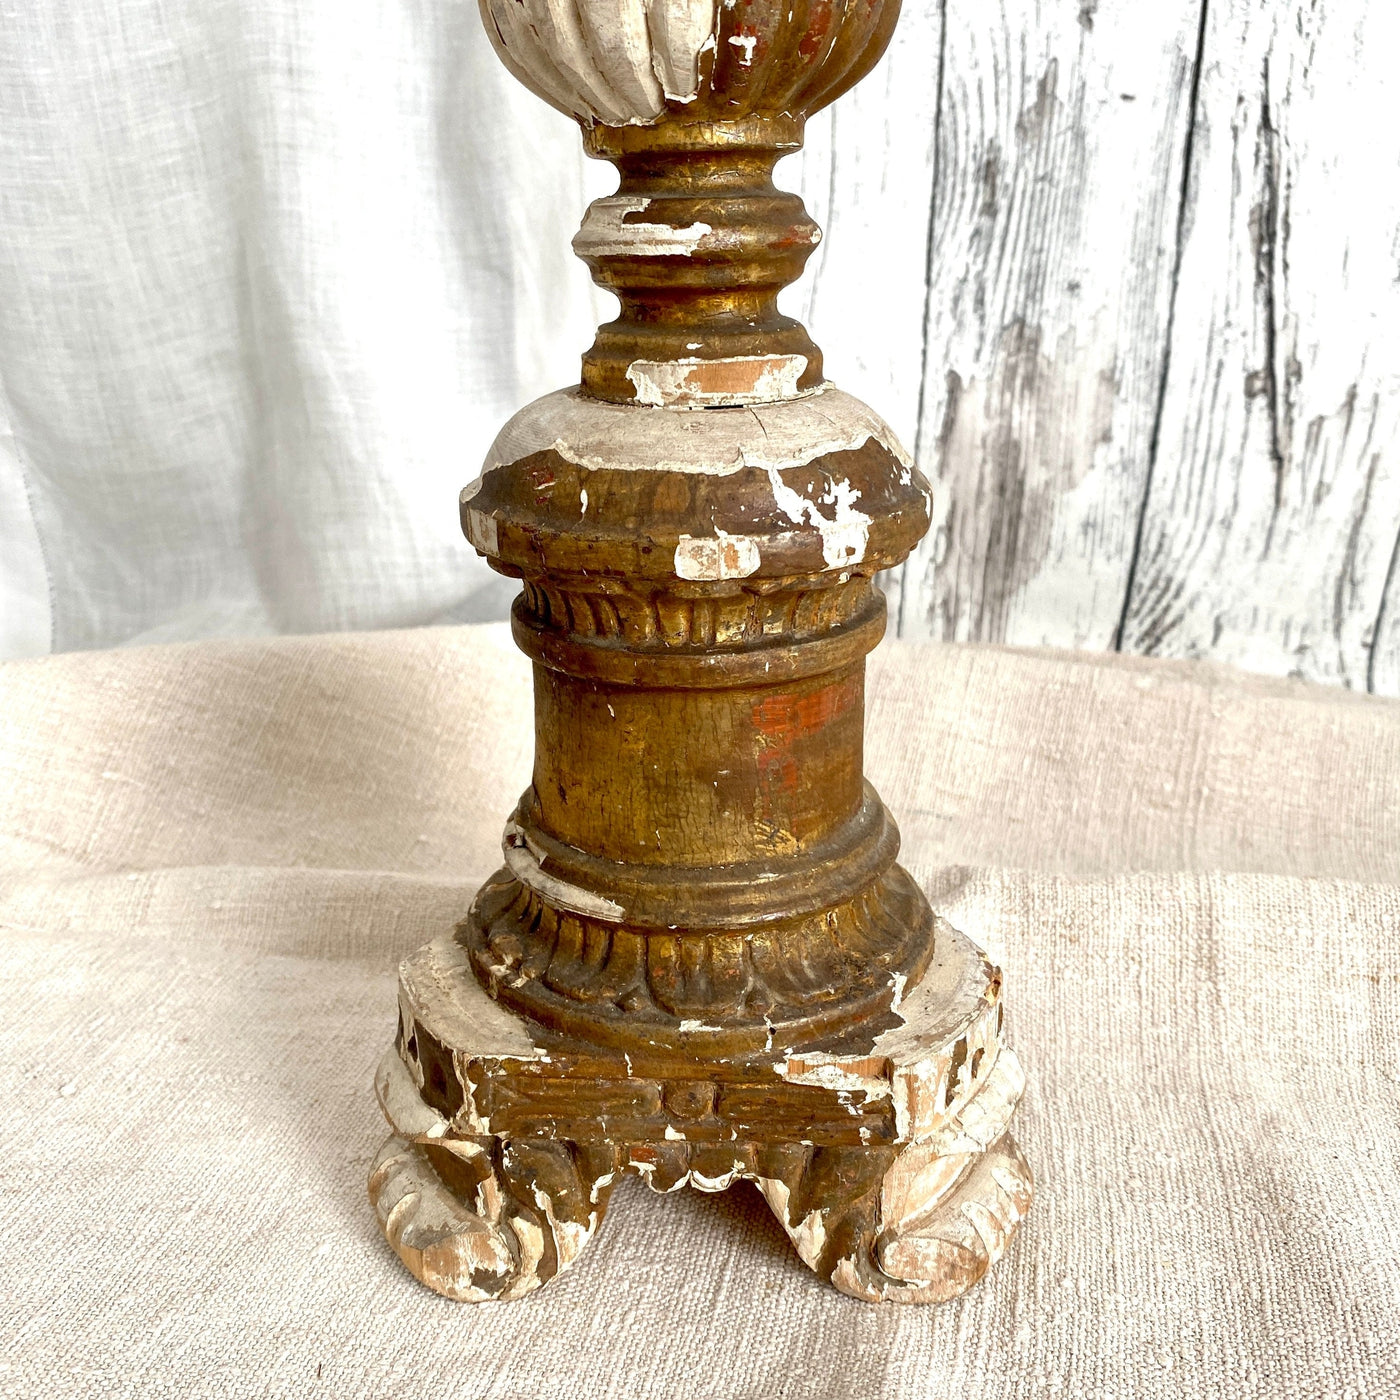 One Antique French HUGE Church Altar Candle Holder. Bronze and